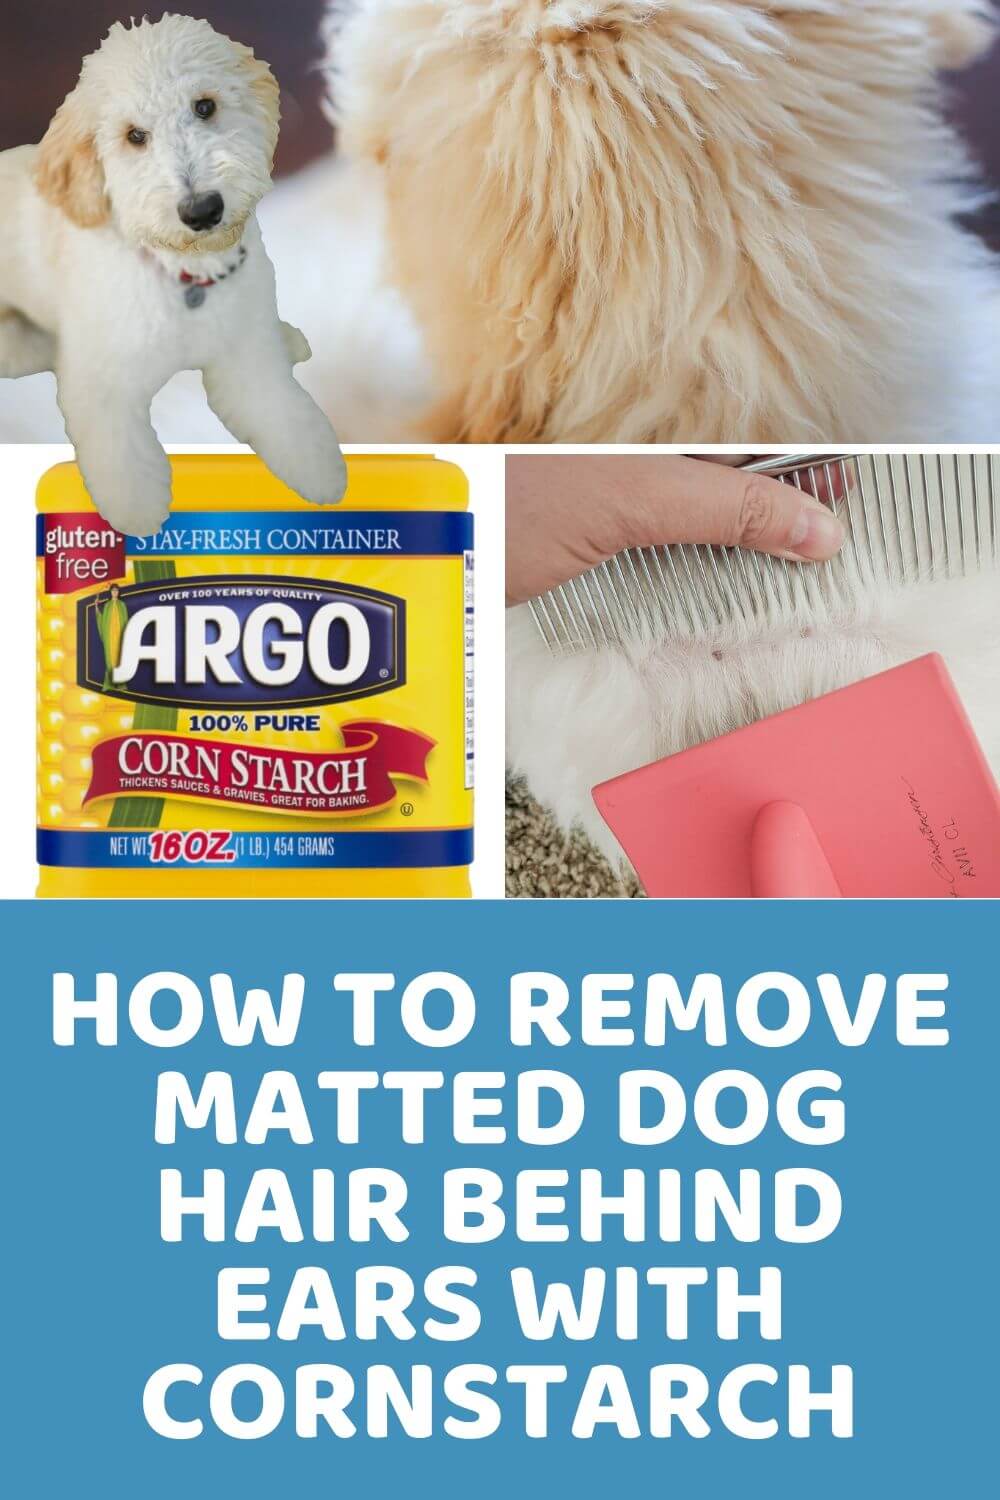 matted dog hair behind ears - dematting a dog with cornstarch